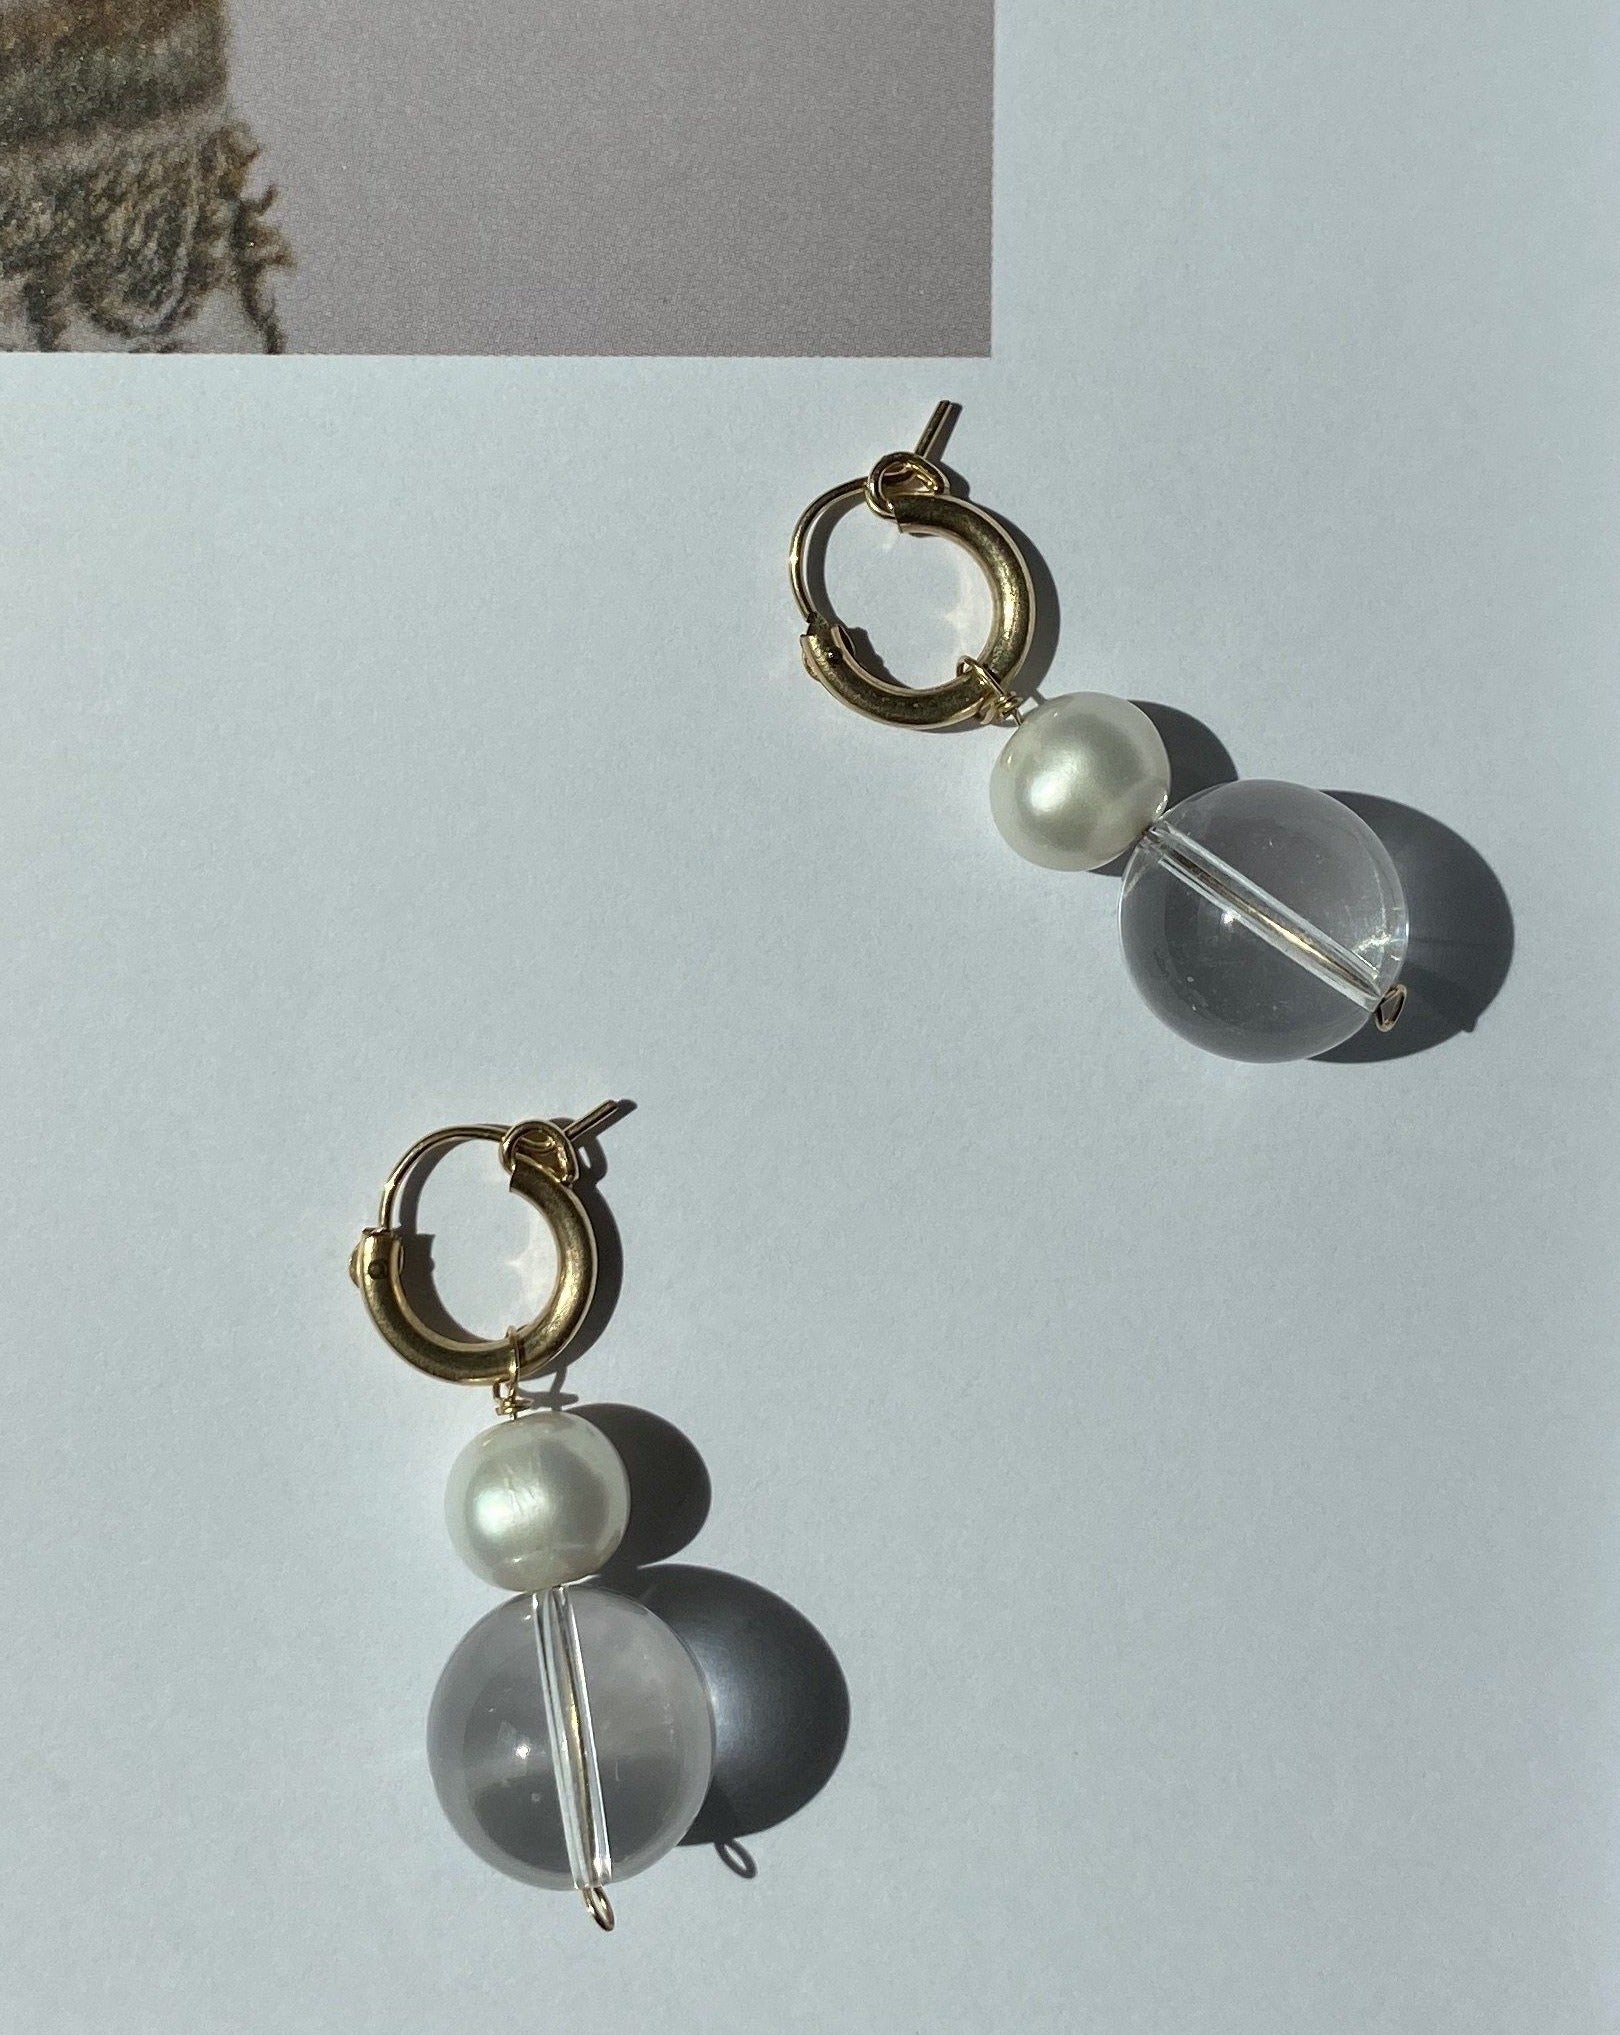 Milae Hoop Earrings by KOZAKH. 12mm snap closure hoop earrings, crafted in 14K Gold Filled, featuring a Crystal Quartz and an 8mm white Pearl.